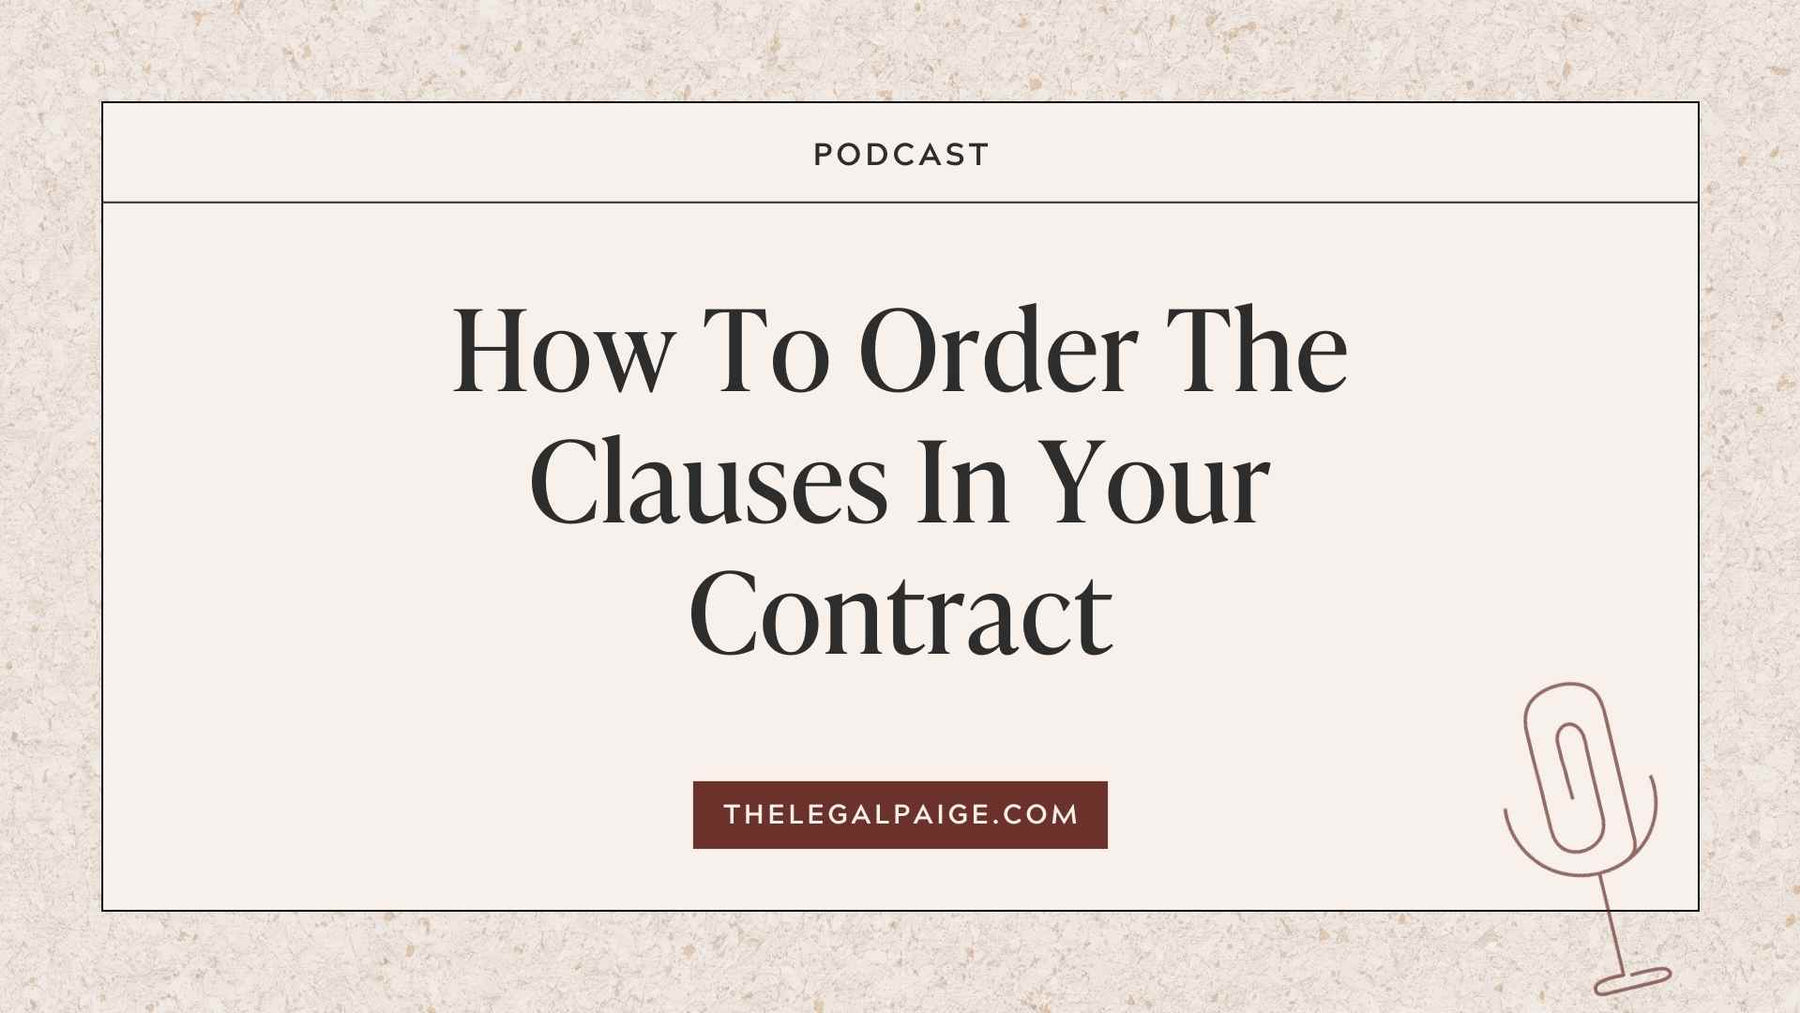 Episode 85: How To Order The Clauses In Your Contract